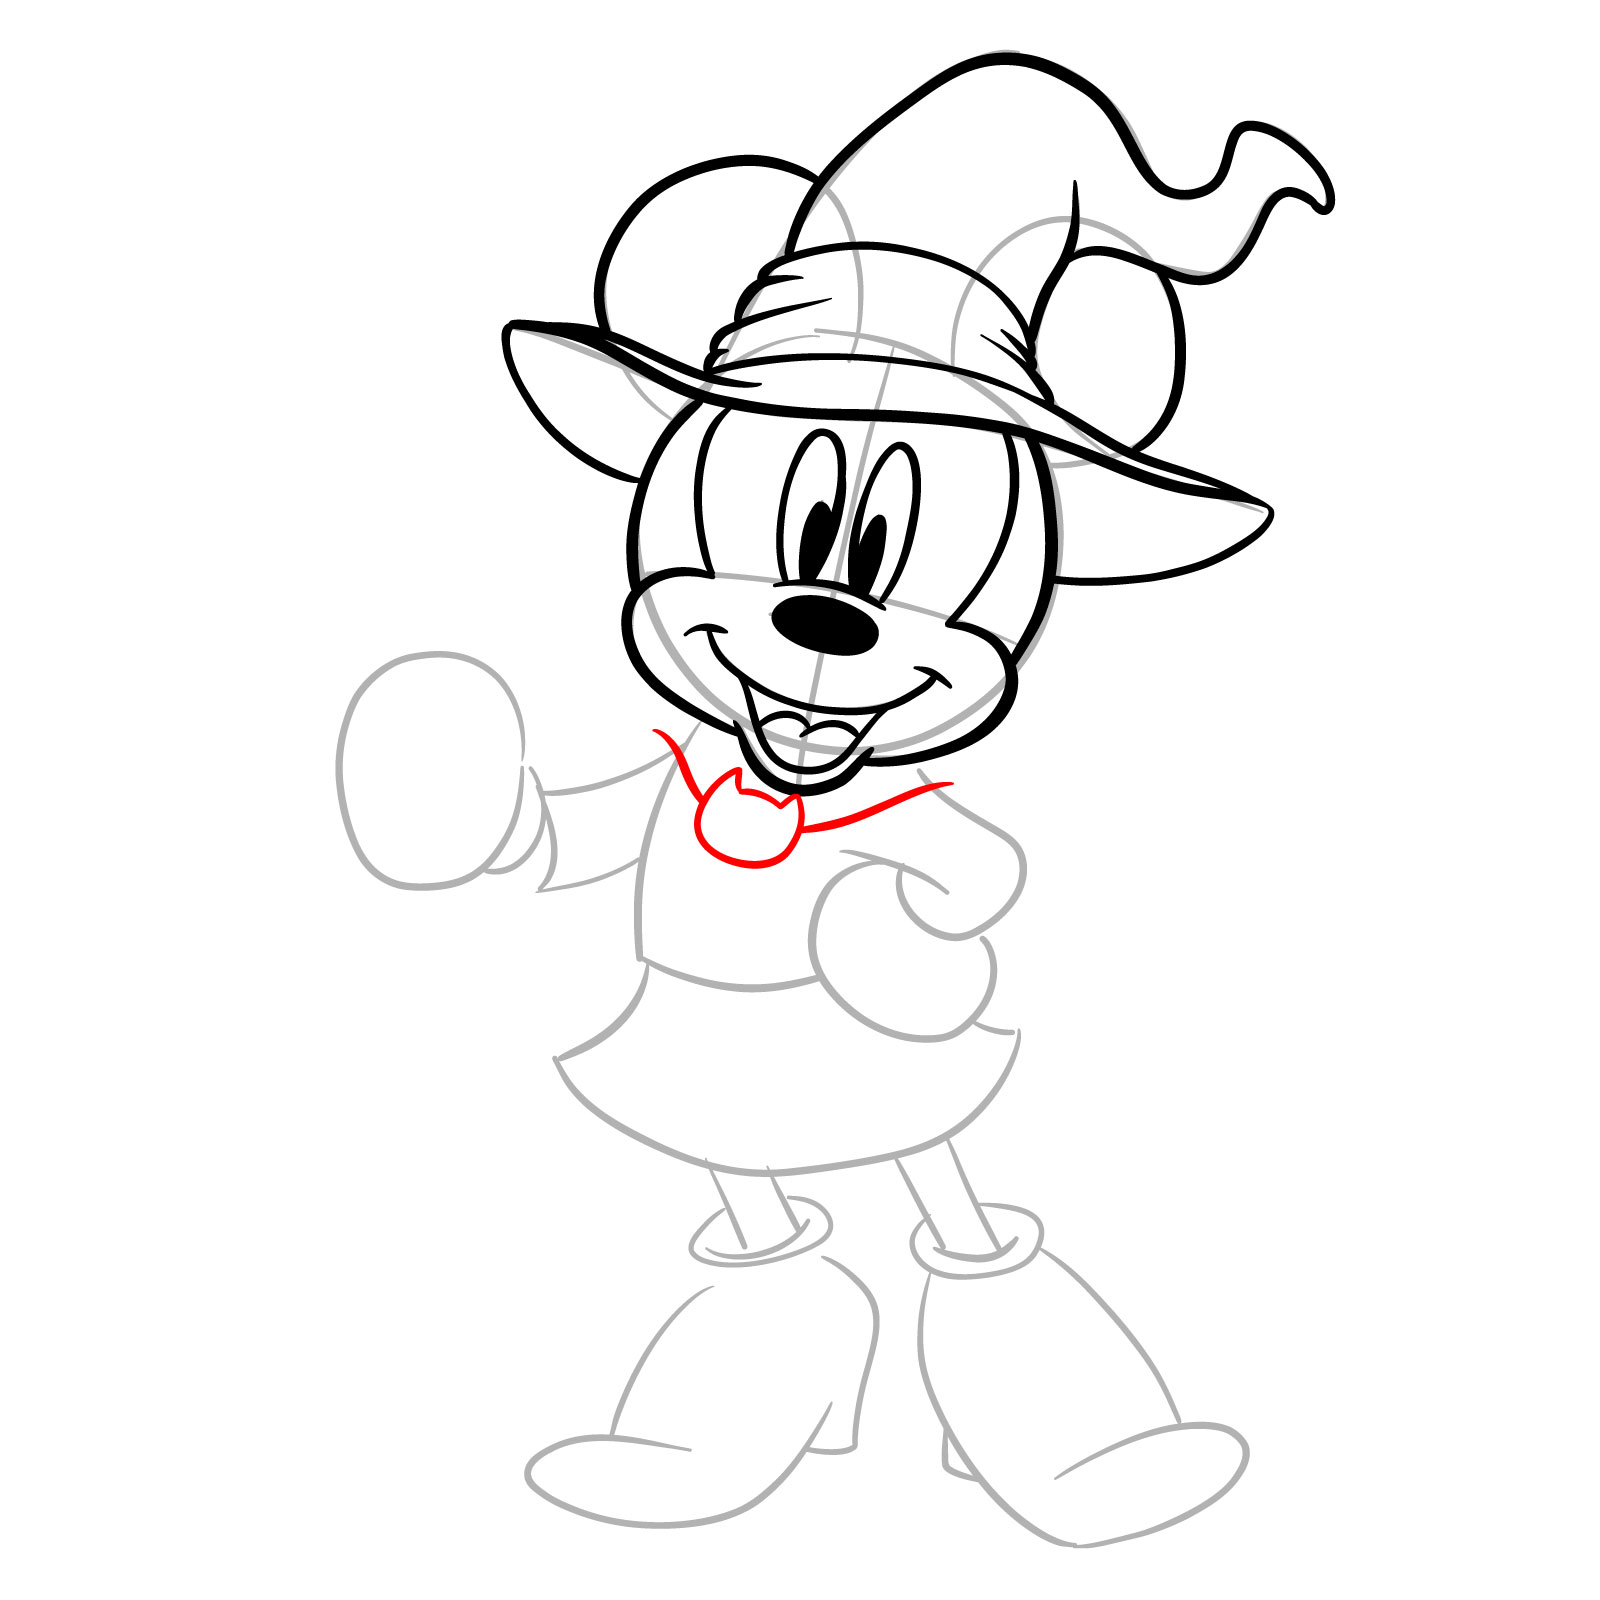 How to draw Halloween Minnie Mouse as a witch - step 13